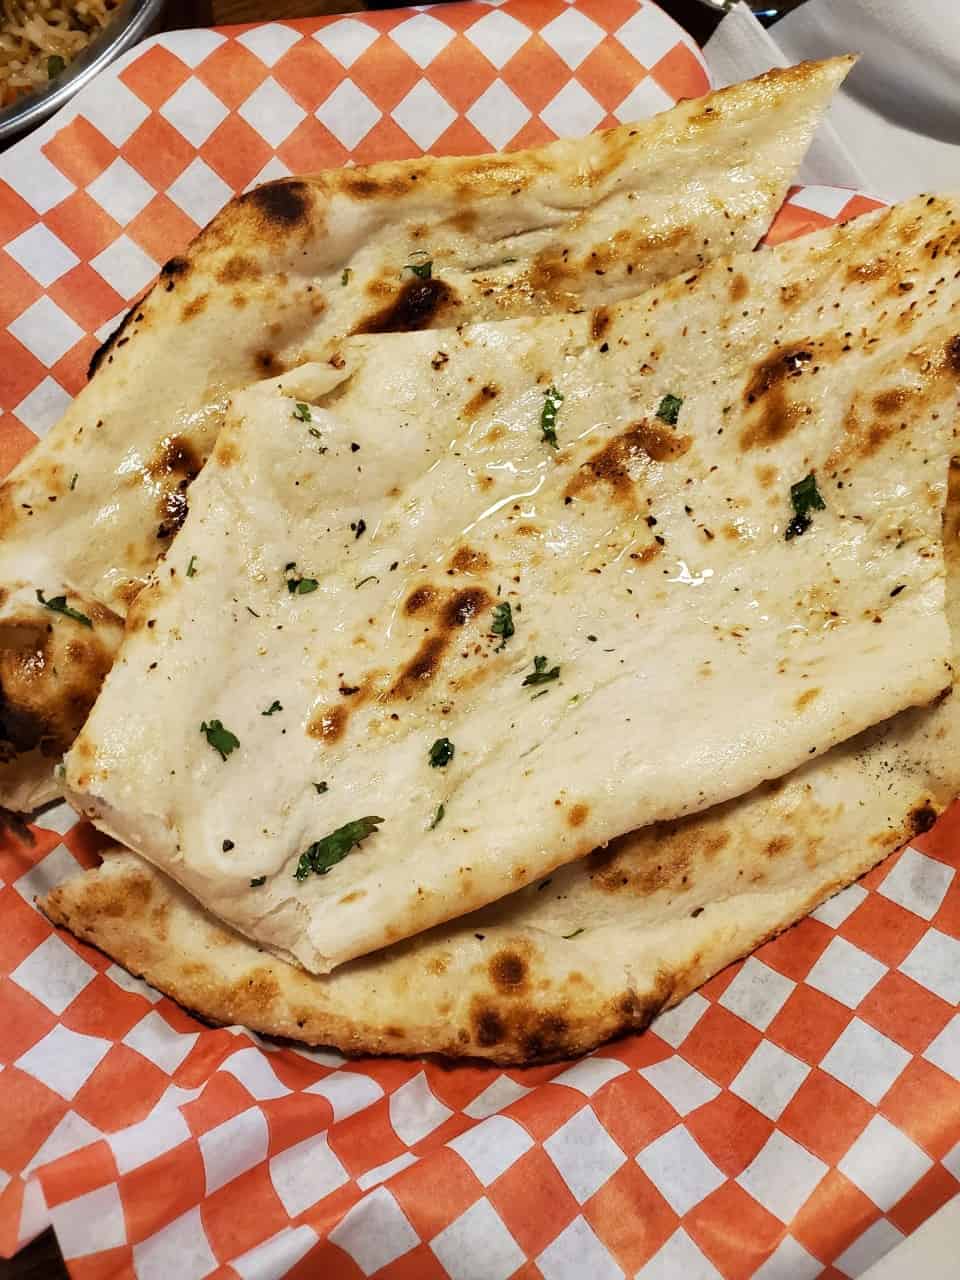 Garlic Naan Bread in High River  - This garlic naan bread was soooooo good. Can't eat at an Indian restaurant without getting some naan bread!